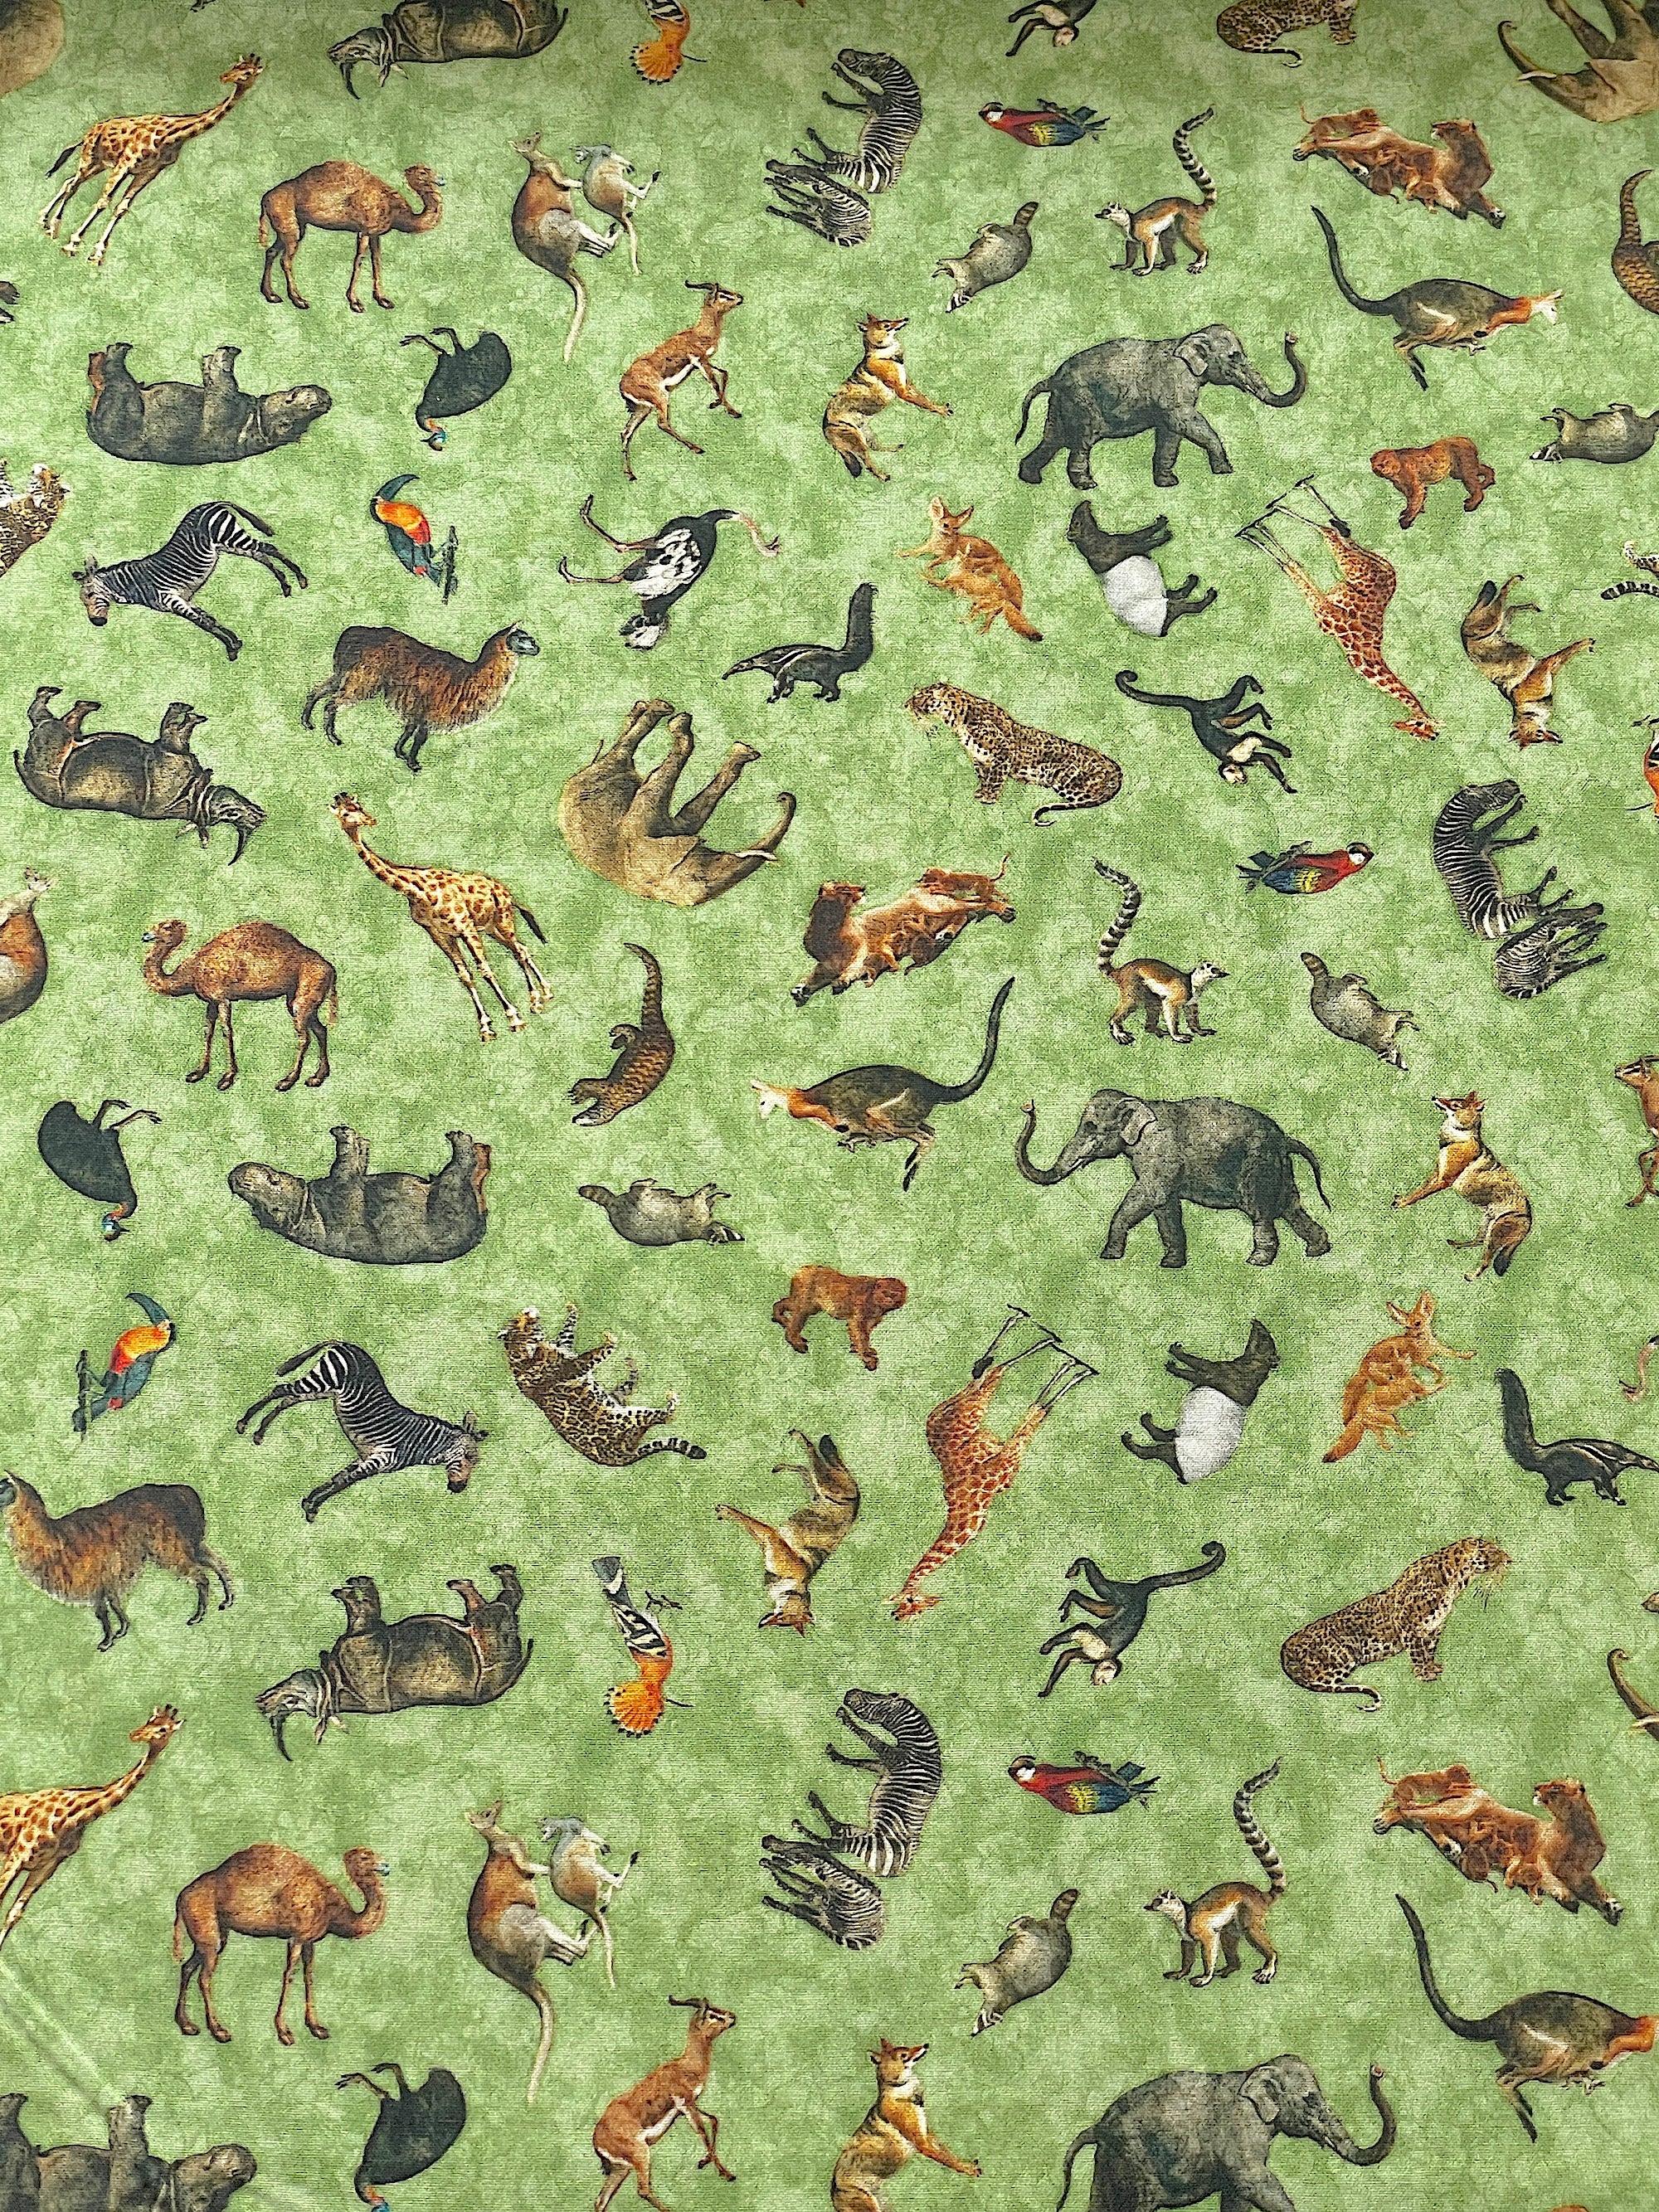 This fabric is called Safari Dreams animal toss.  This green cotton fabric is covered with zebras, elephants, giraffe, llamas, rhinos, tiers and other animals you would find in the zoo.